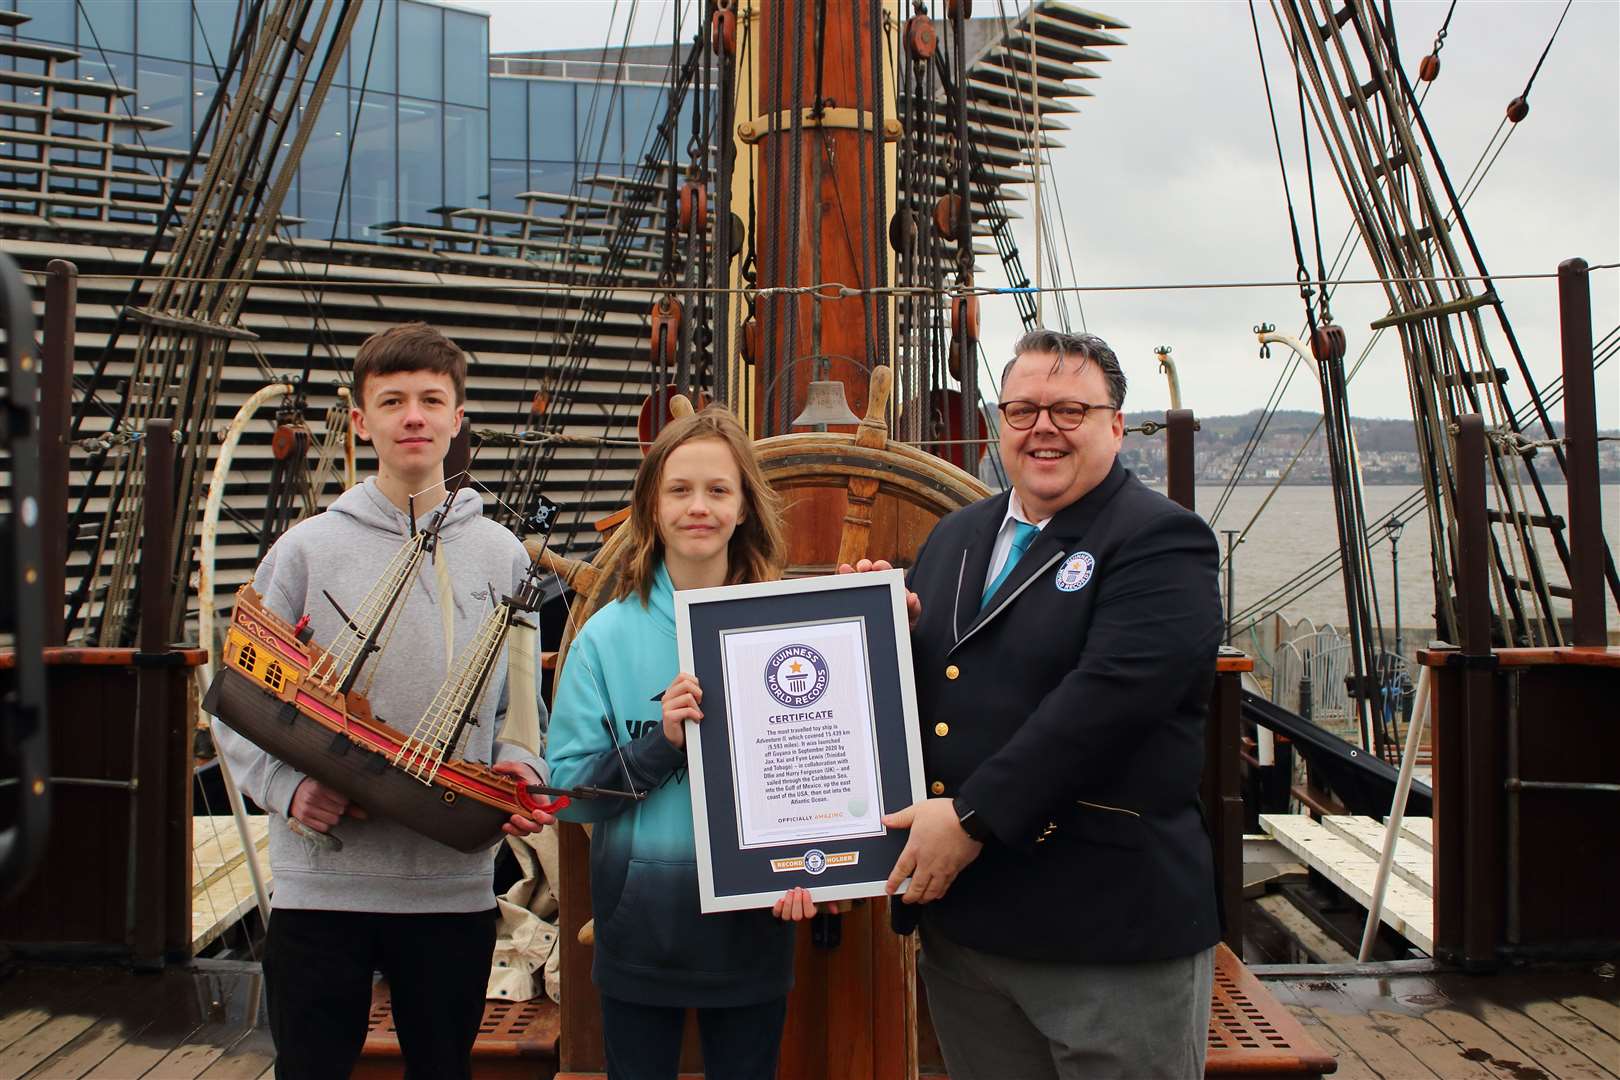 Guinness World Record holders Ollie and Harry Fergusson from Turriff were presented with their certificate aboard the Discovery in Dundee by Craig Glenday, Editor-in Chief, Guinness World Records. Picture: Dundee Heritage.